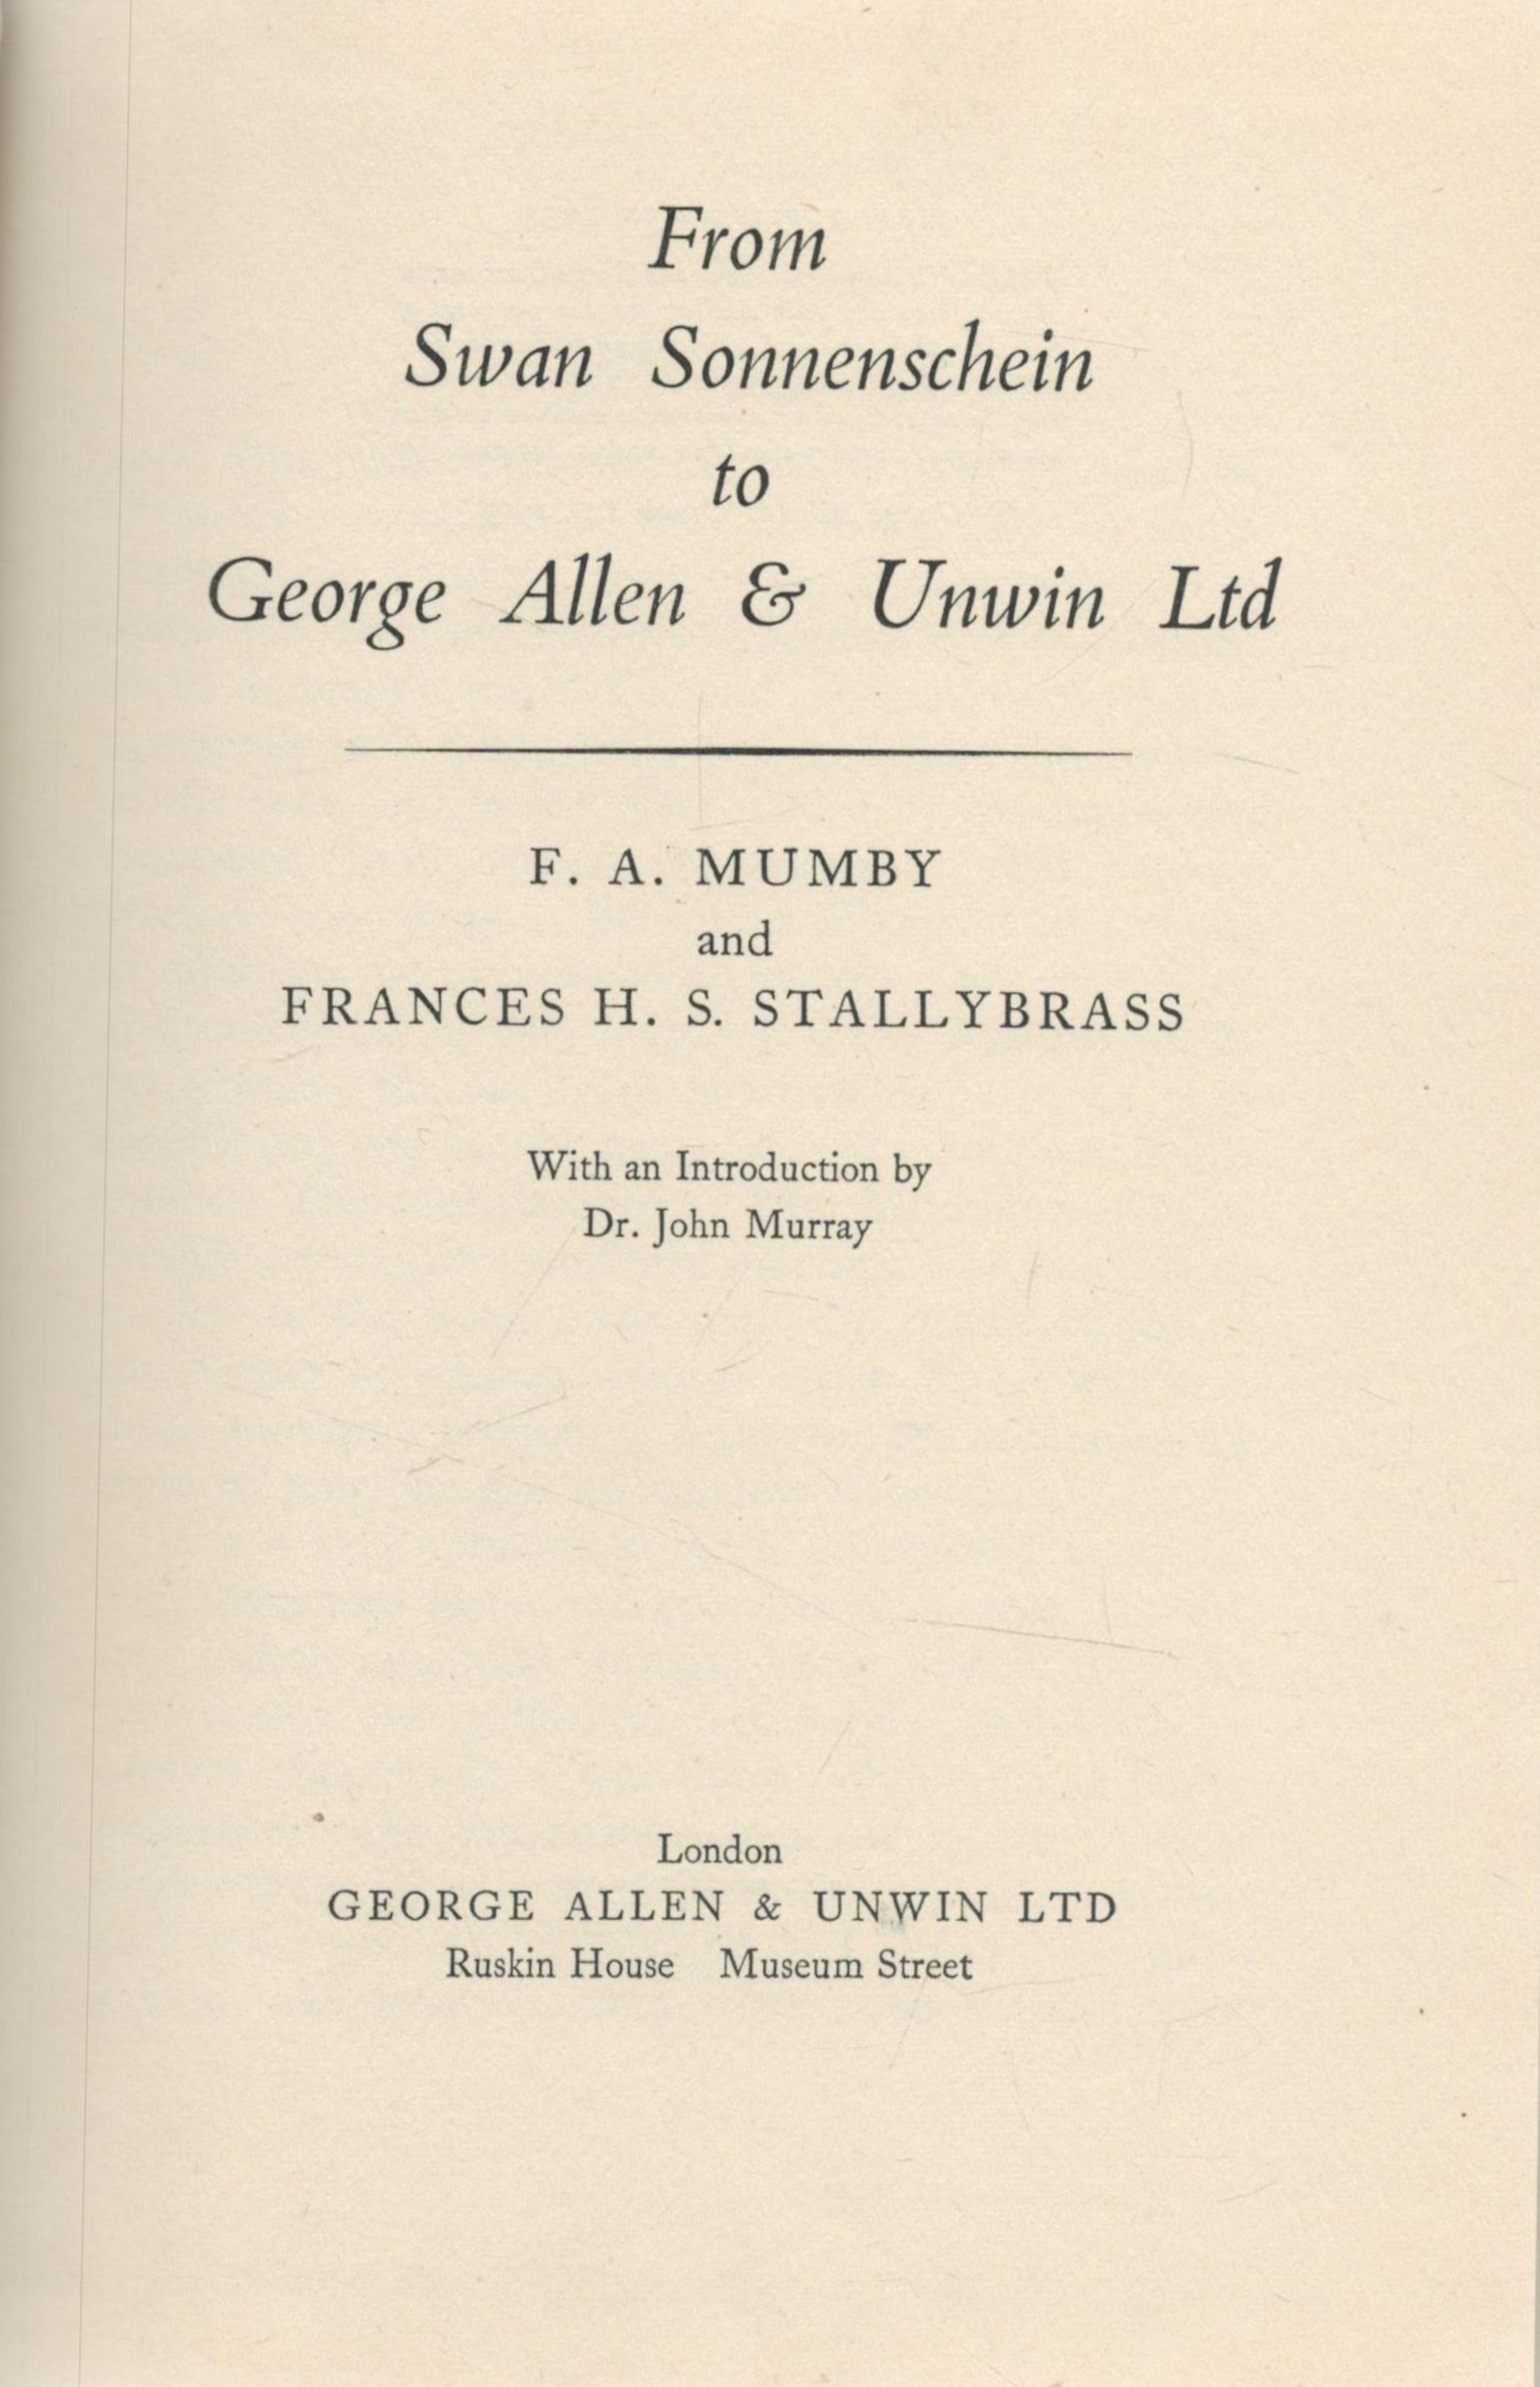 From Swan Sonnenschein to George Allen and Unwin Ltd. By F.A. Mumby and Frances H.S. Stallybrass. - Image 2 of 3